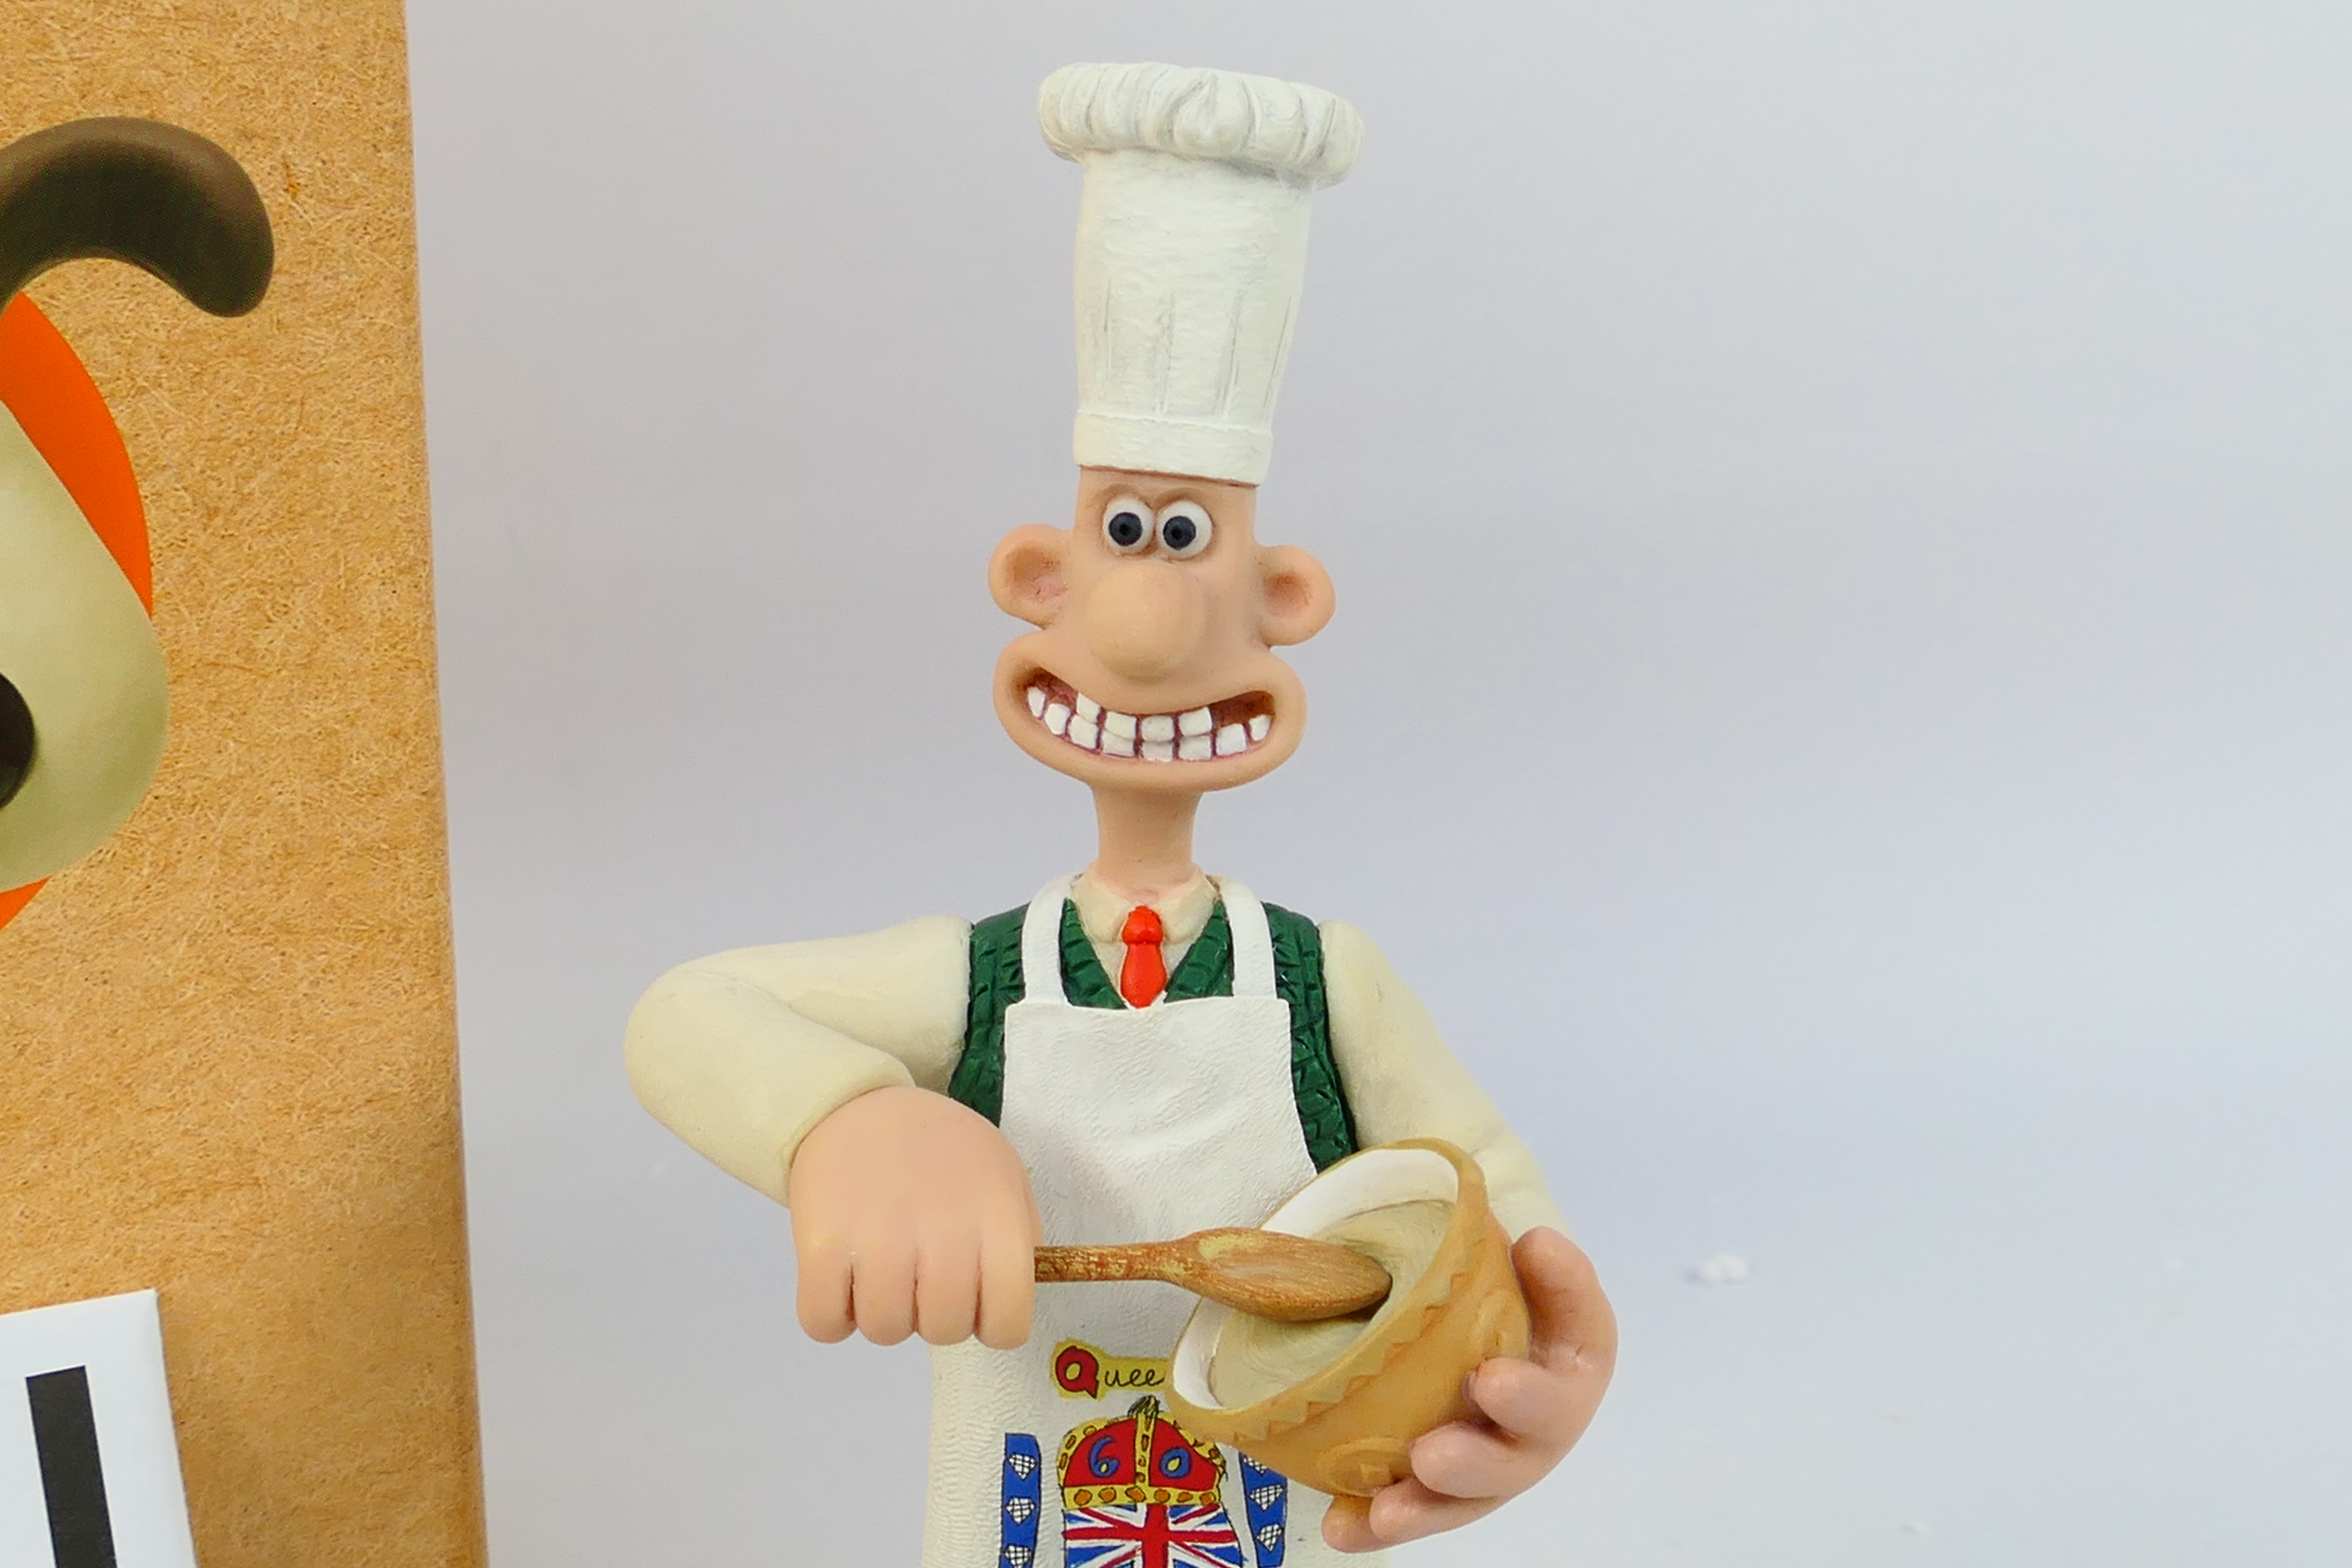 Robert Harrop - Wallace and Gromit - A Limited Edition Robert Harrop resin figure of Wallace - Image 3 of 7